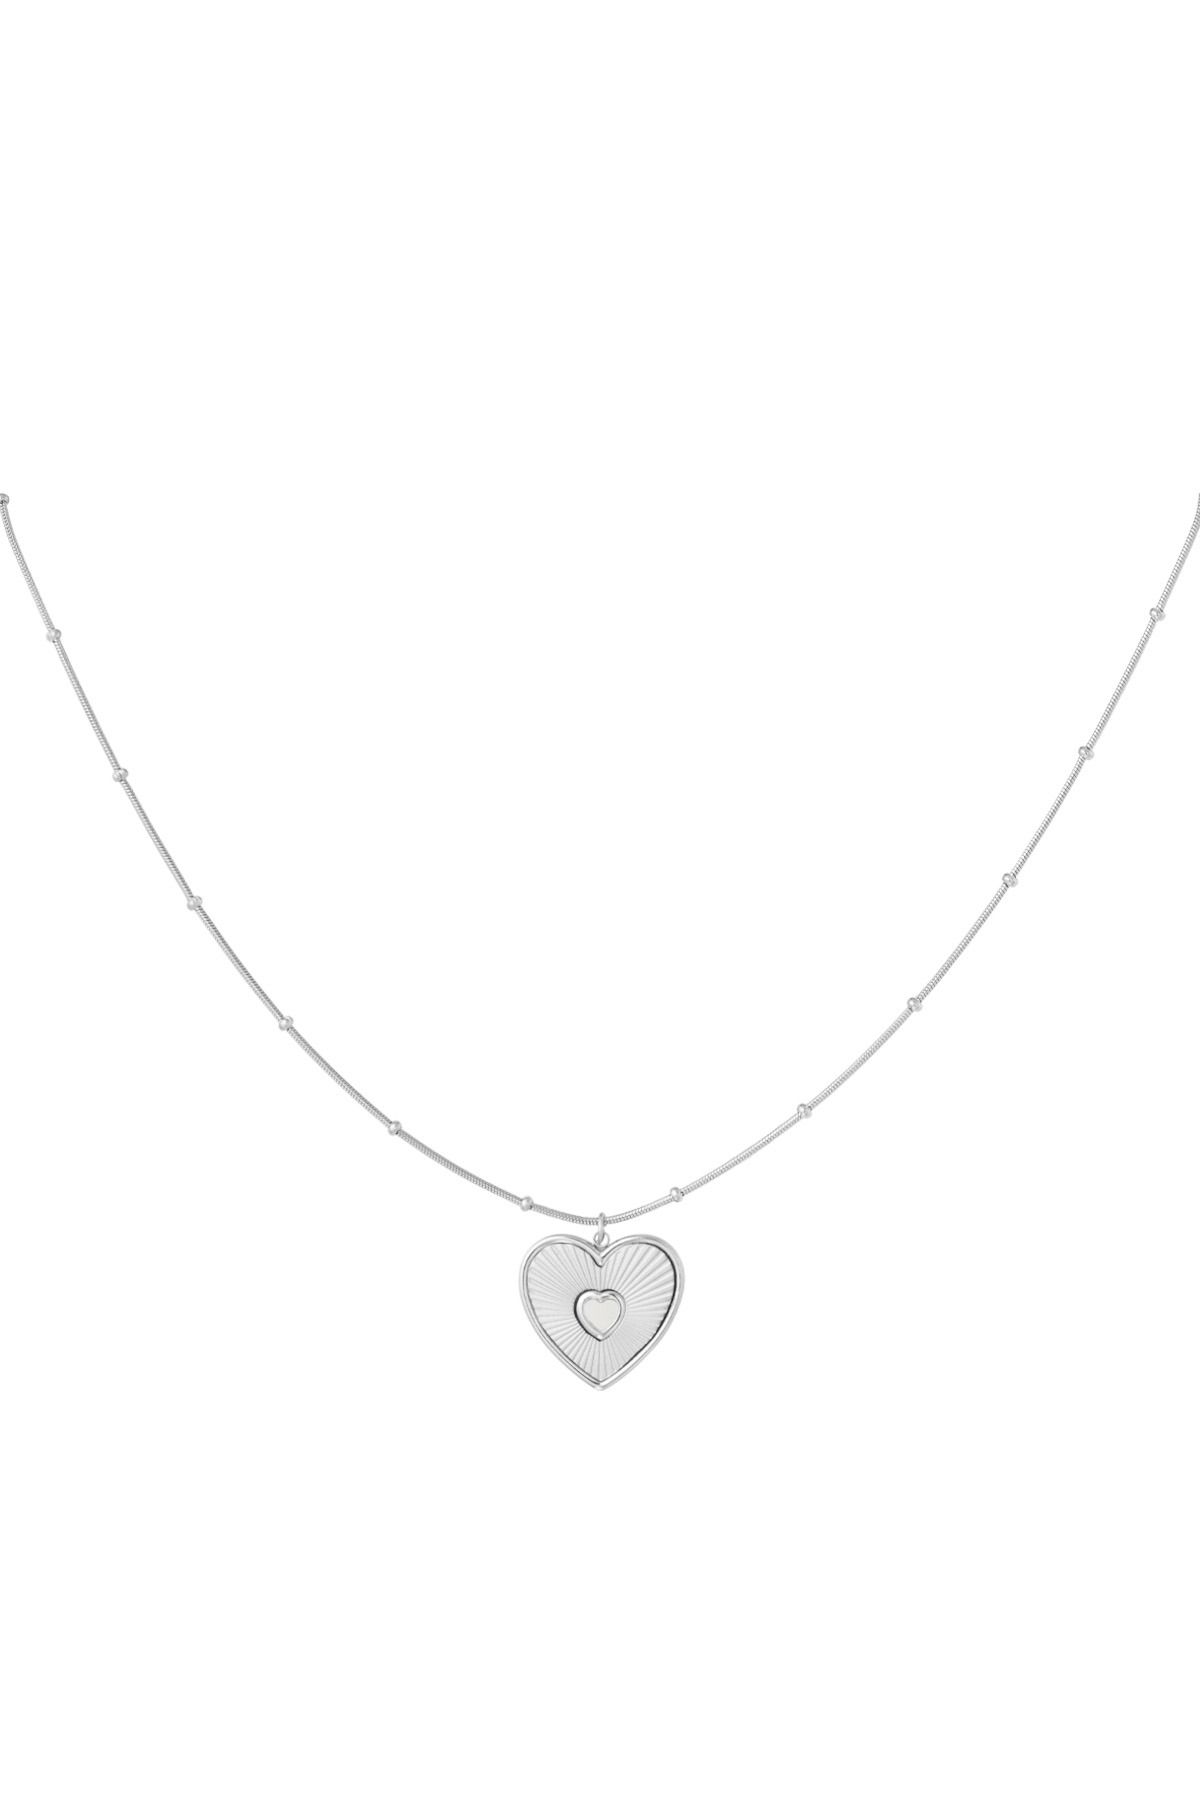 Necklace lover heart - silver